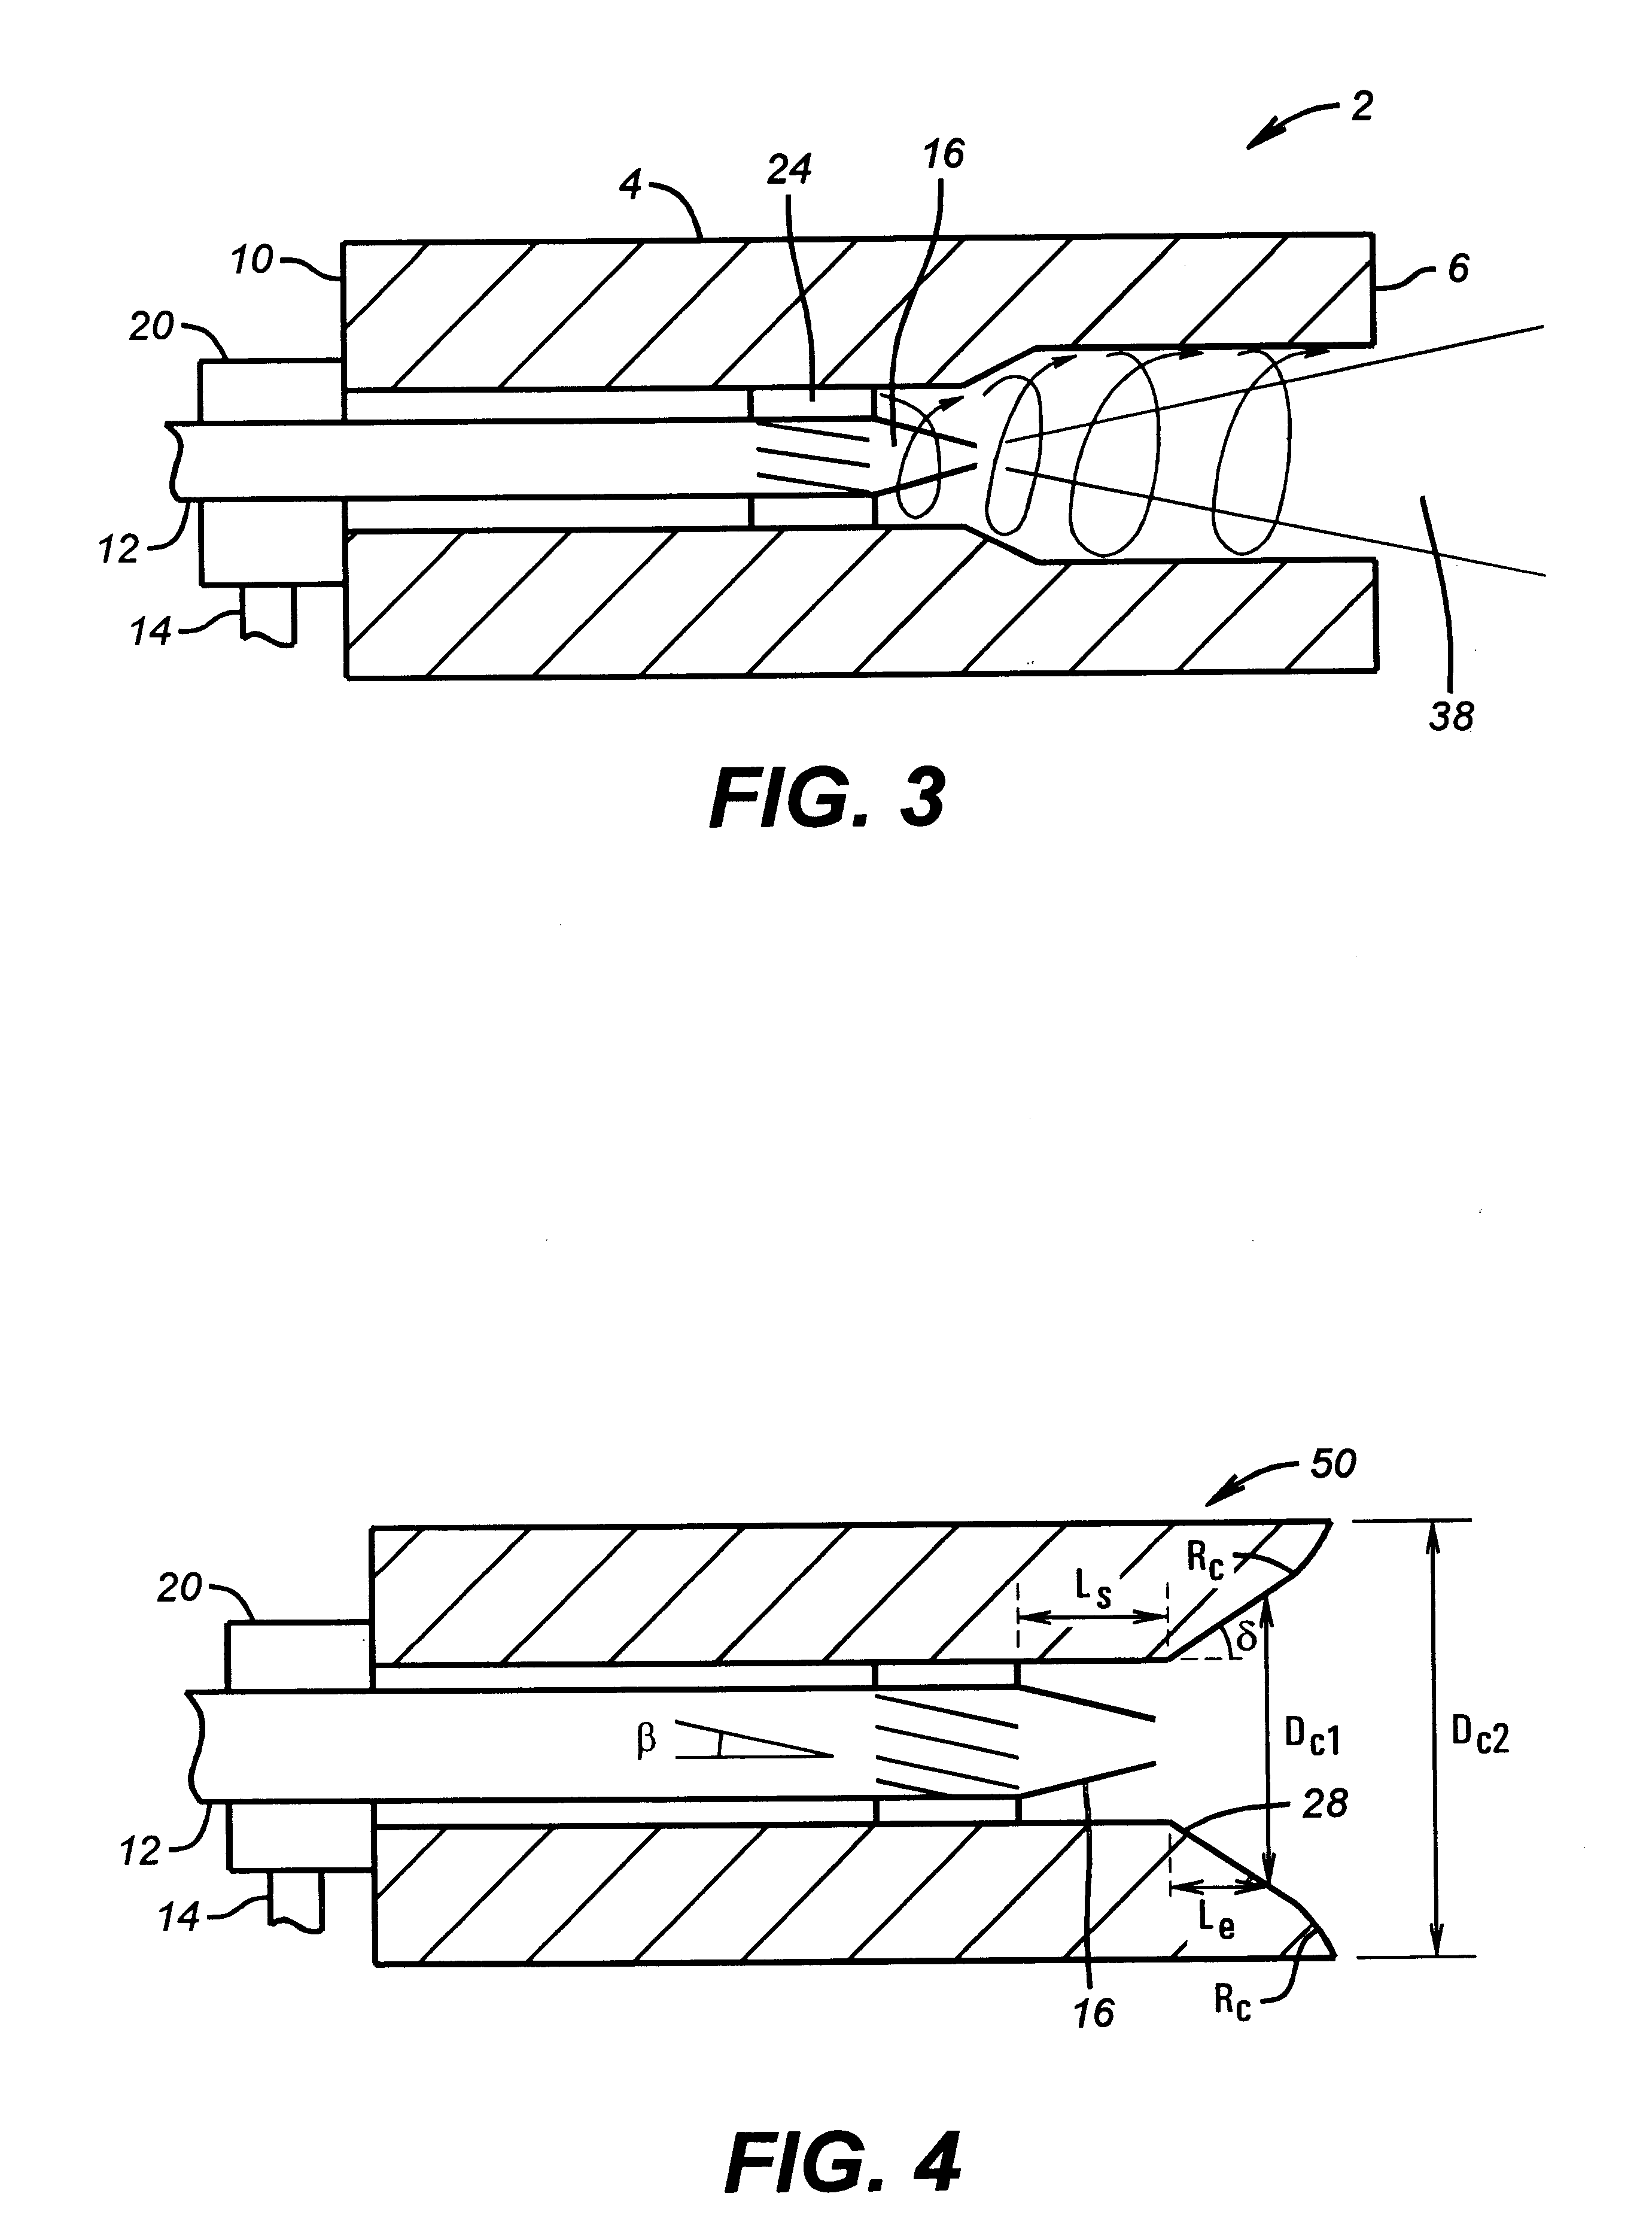 Self-cooled oxygen-fuel burner for use in high-temperature and high-particulate furnaces